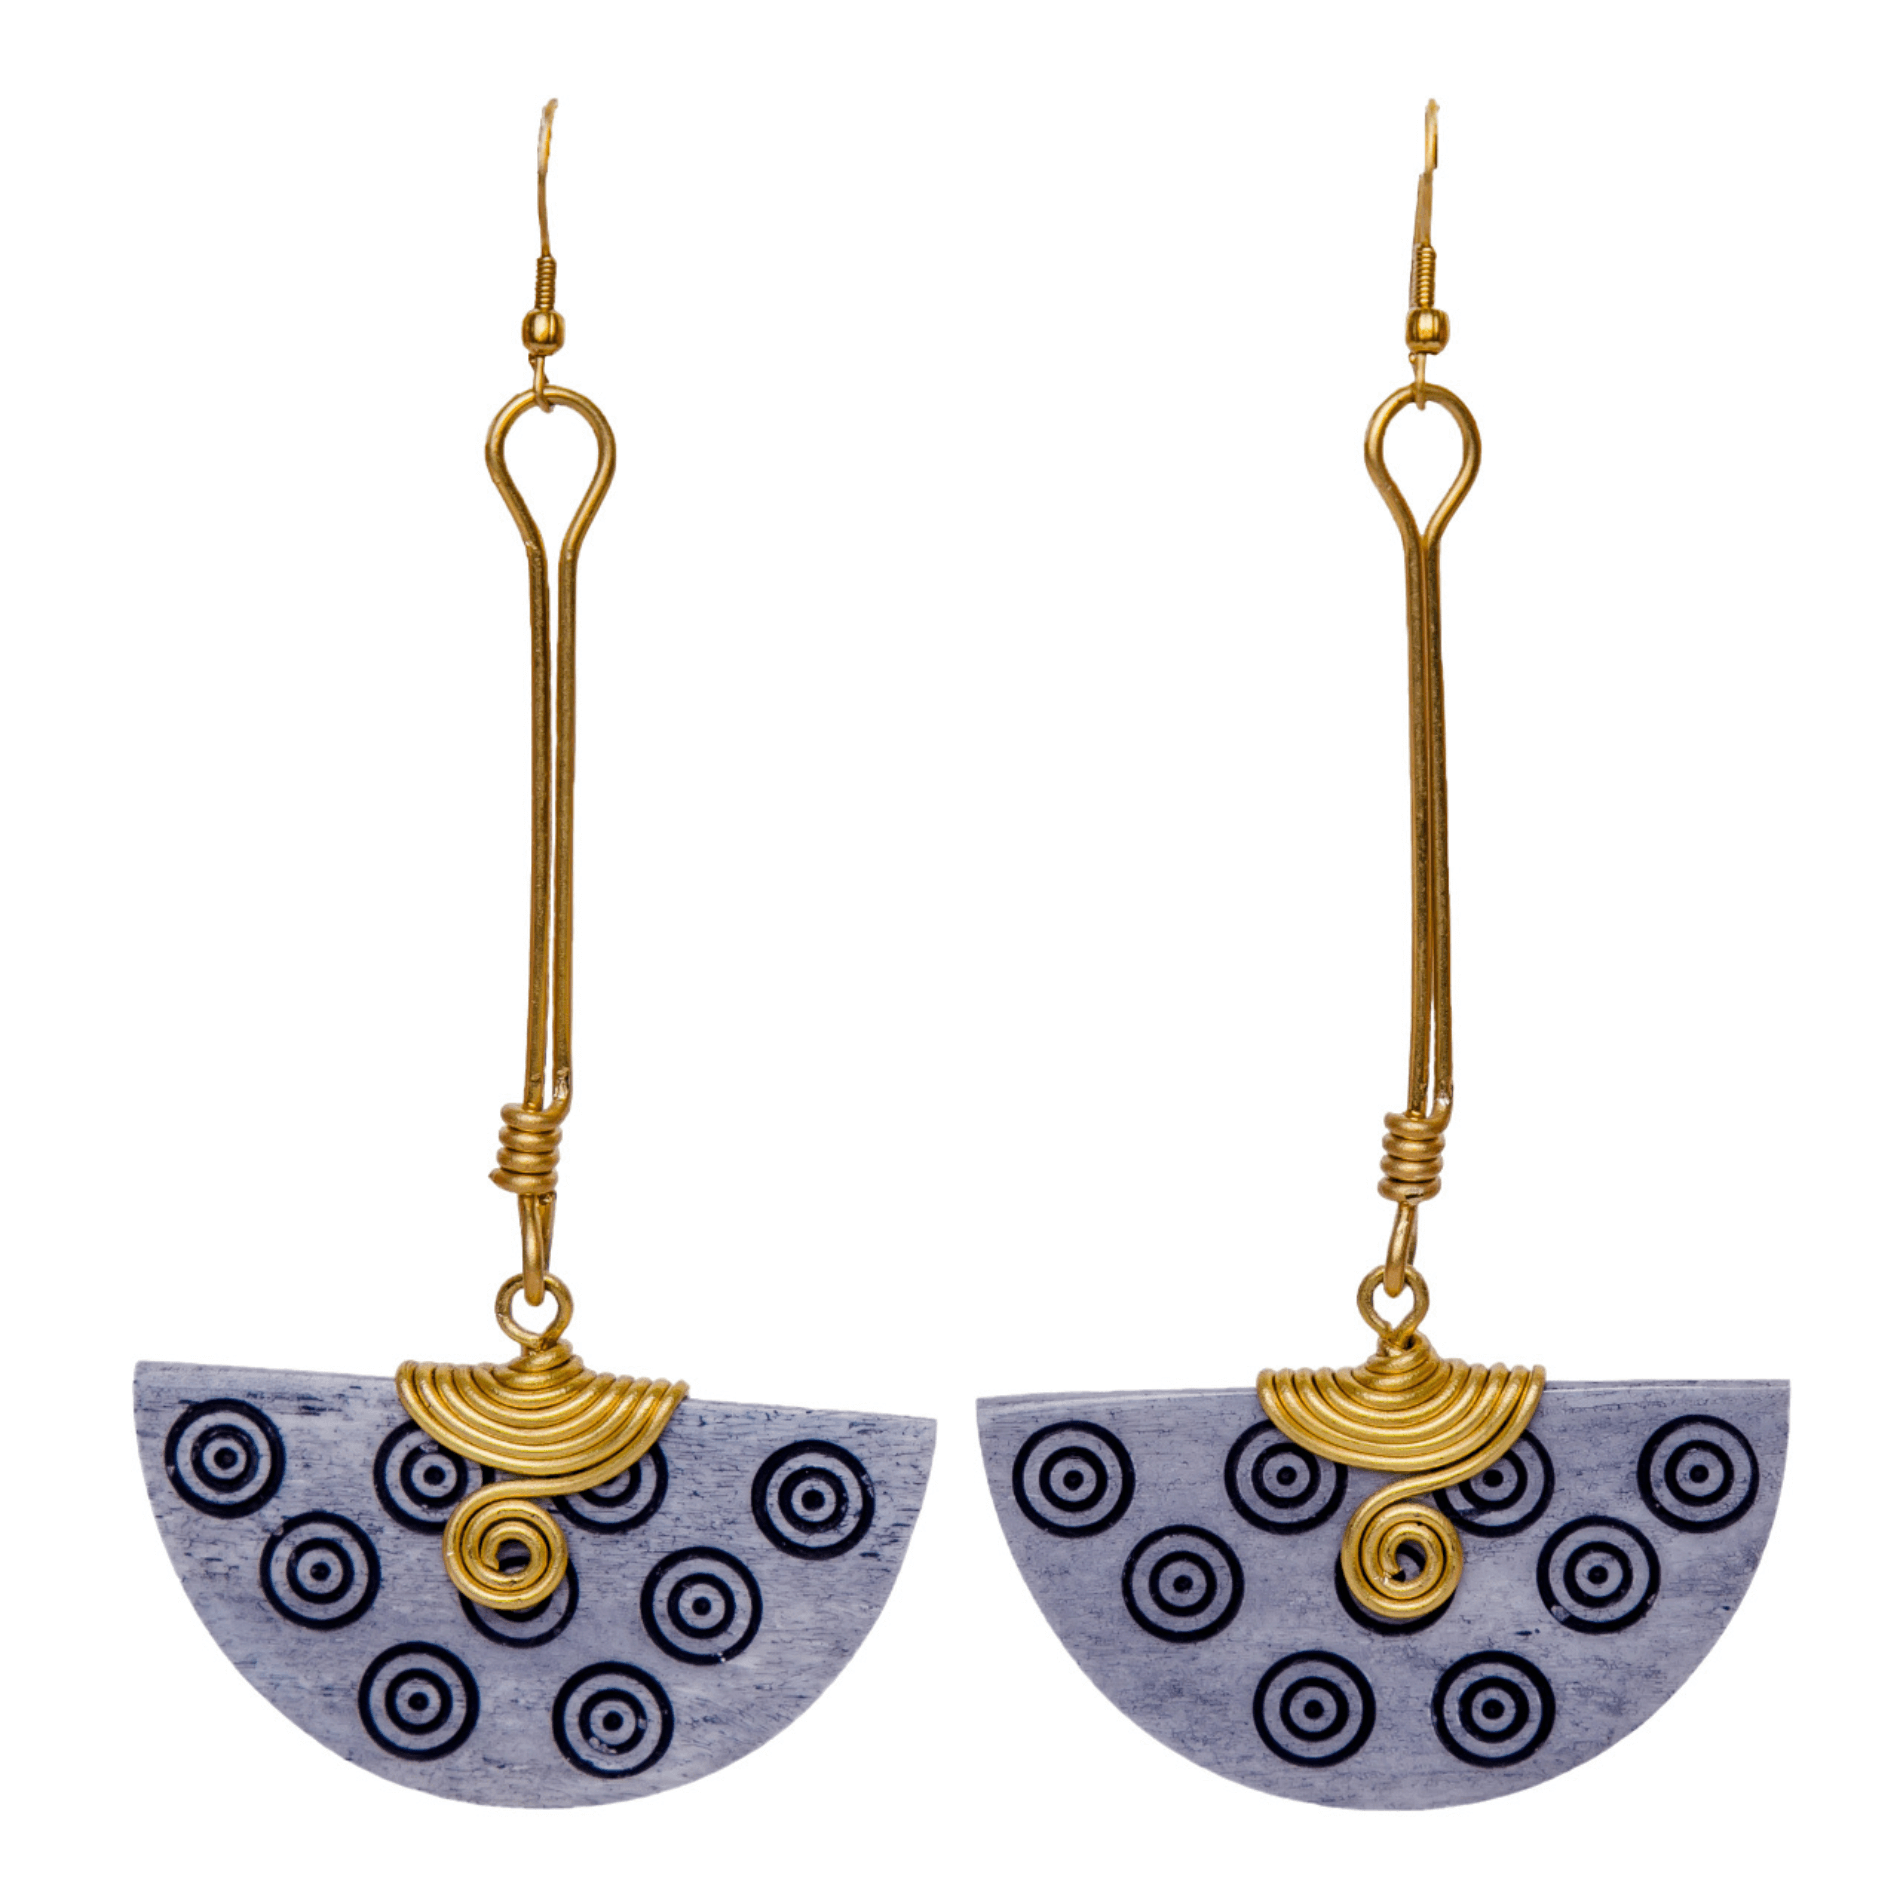 Long Gray earrings handmade with camel bone and gold plated brass. The camel bone is hand painted with circles